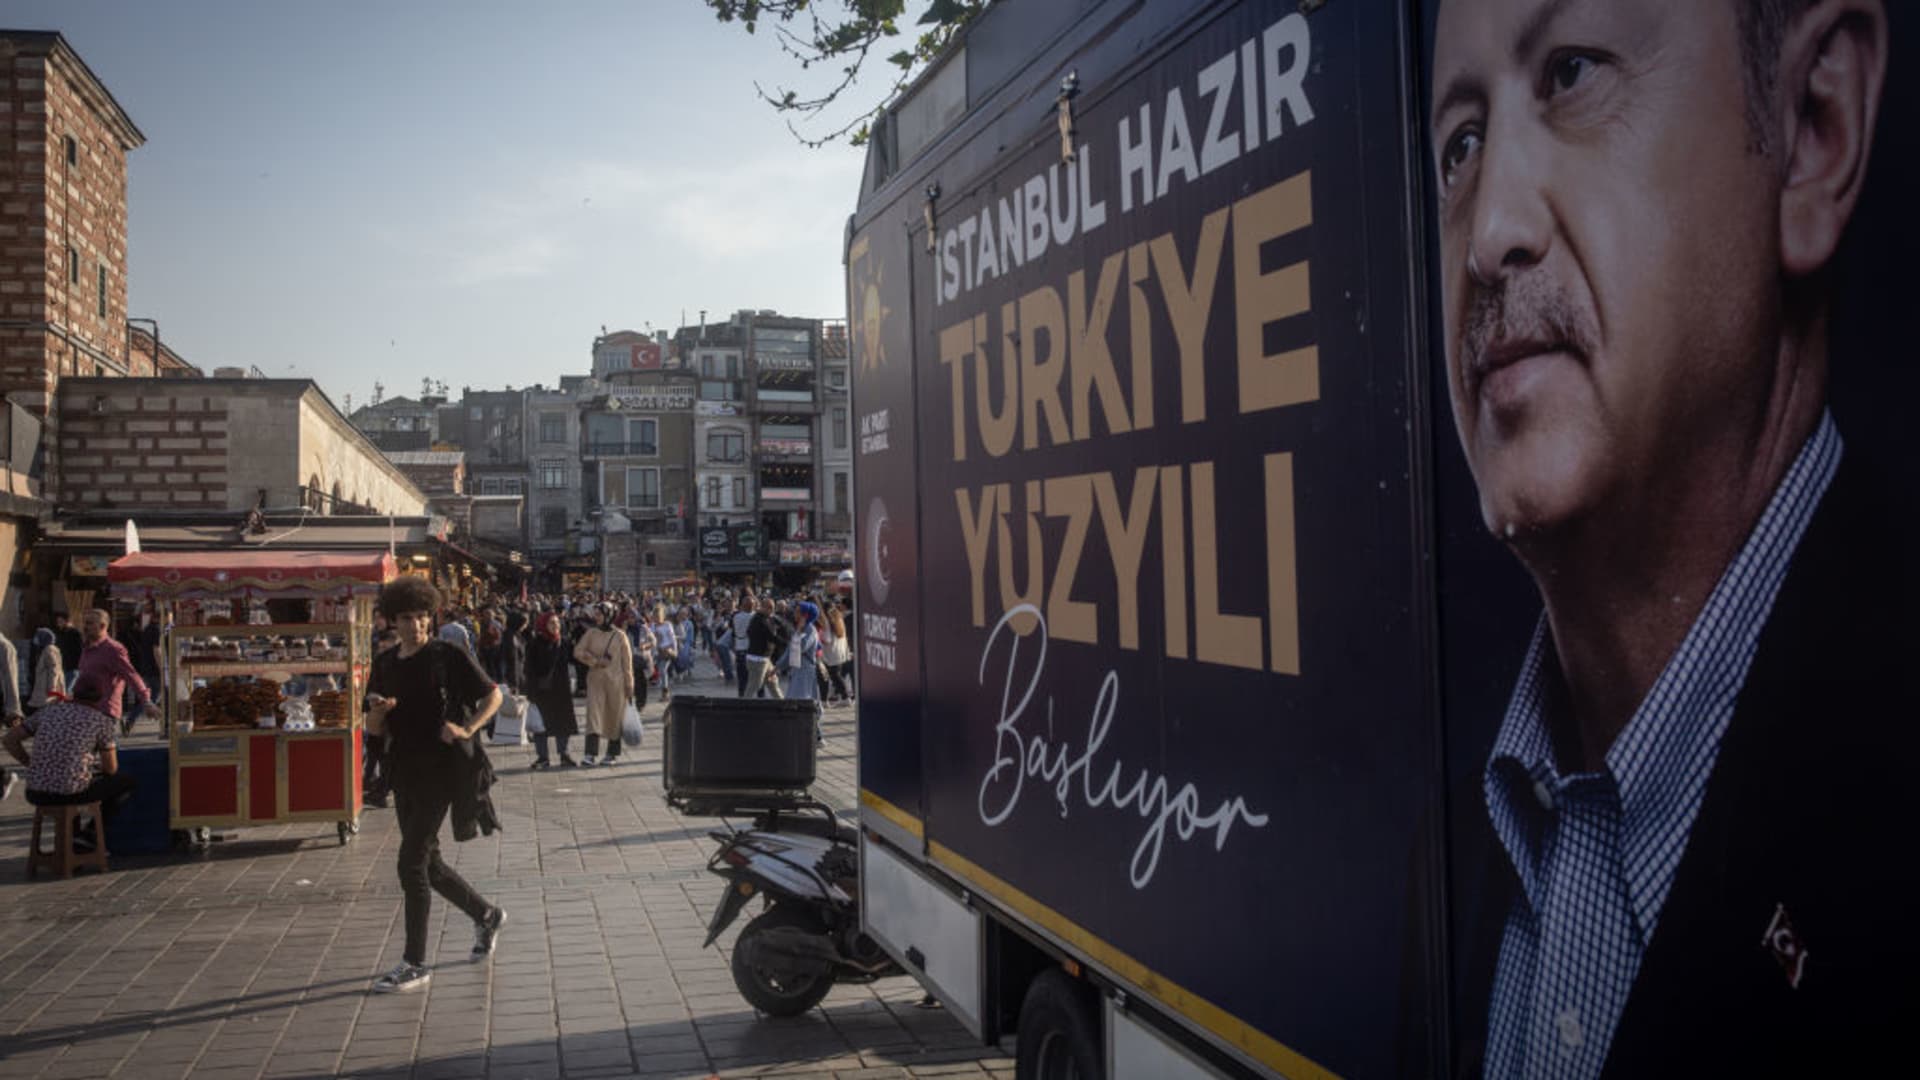 Turkey votes in runoff election after candidates double down on nationalism and apprehension